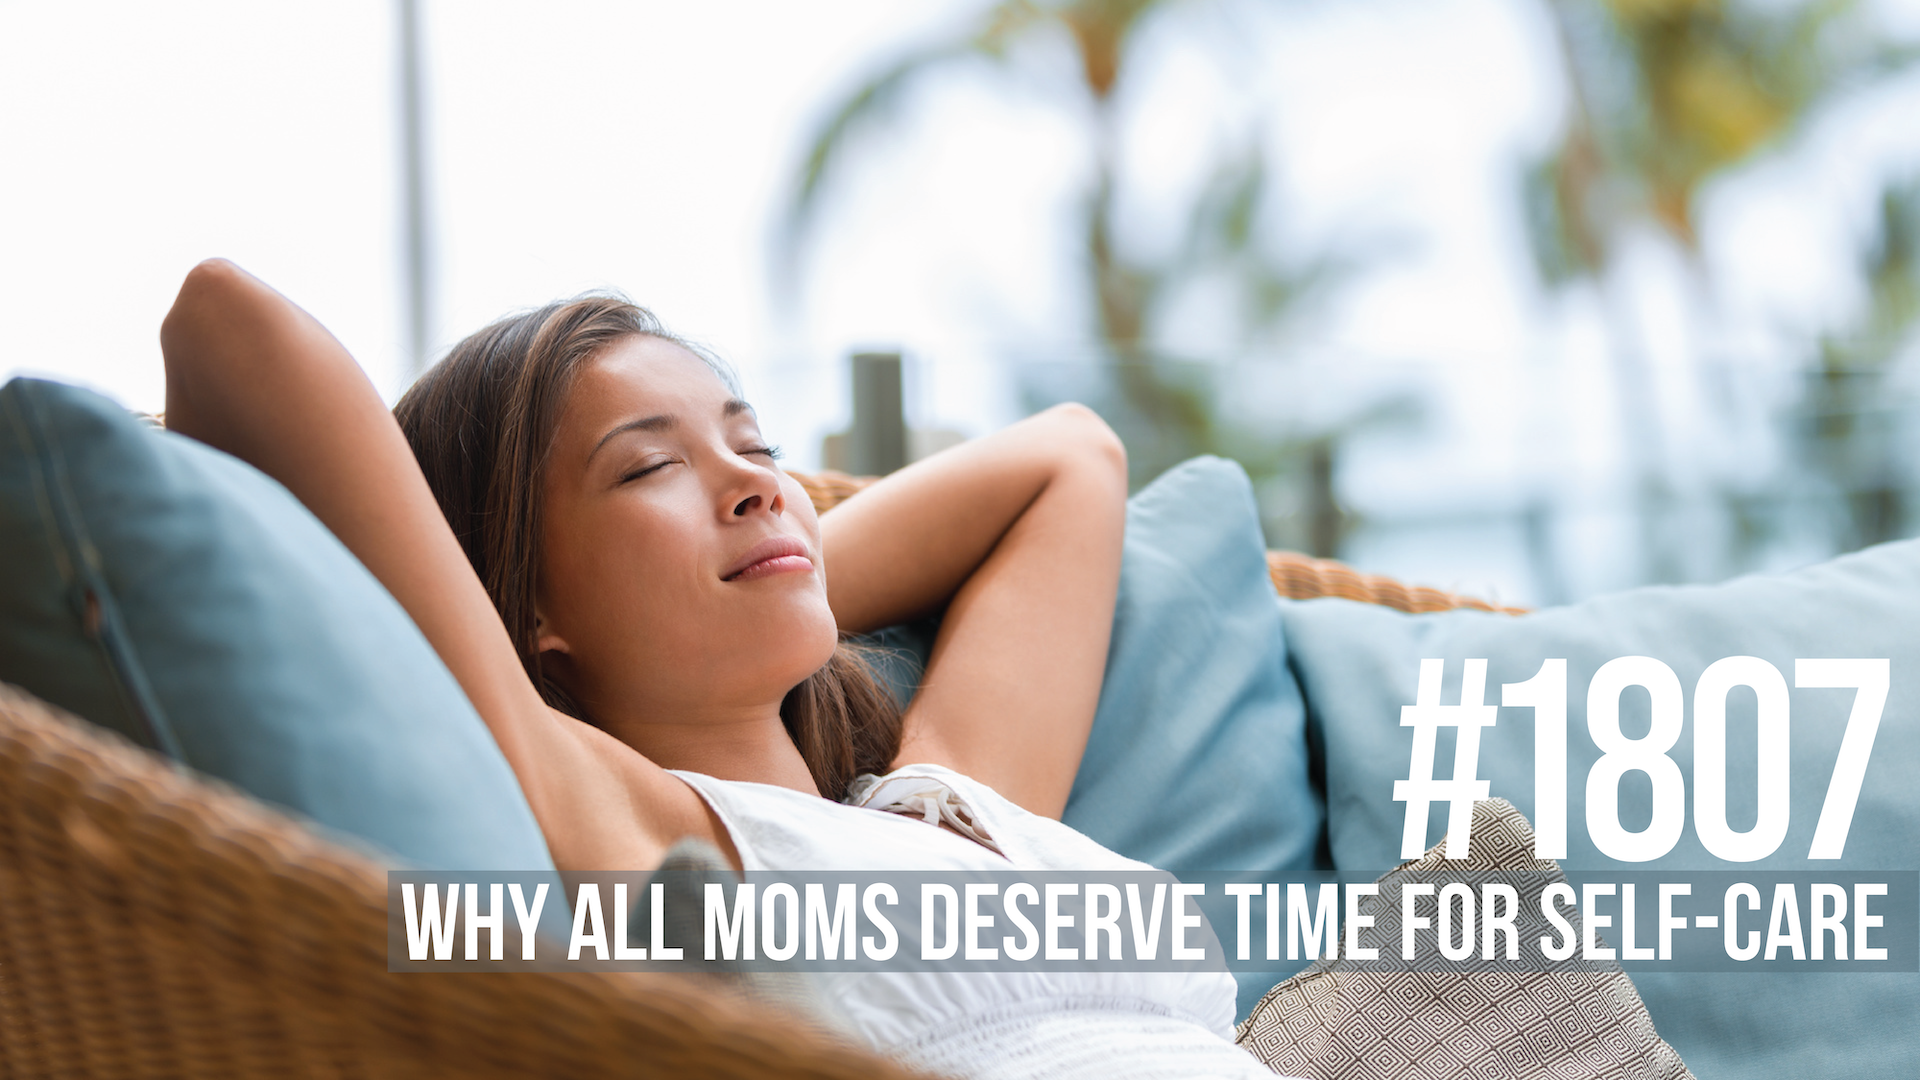 1807: Why All Moms Deserve Time for Self-Care